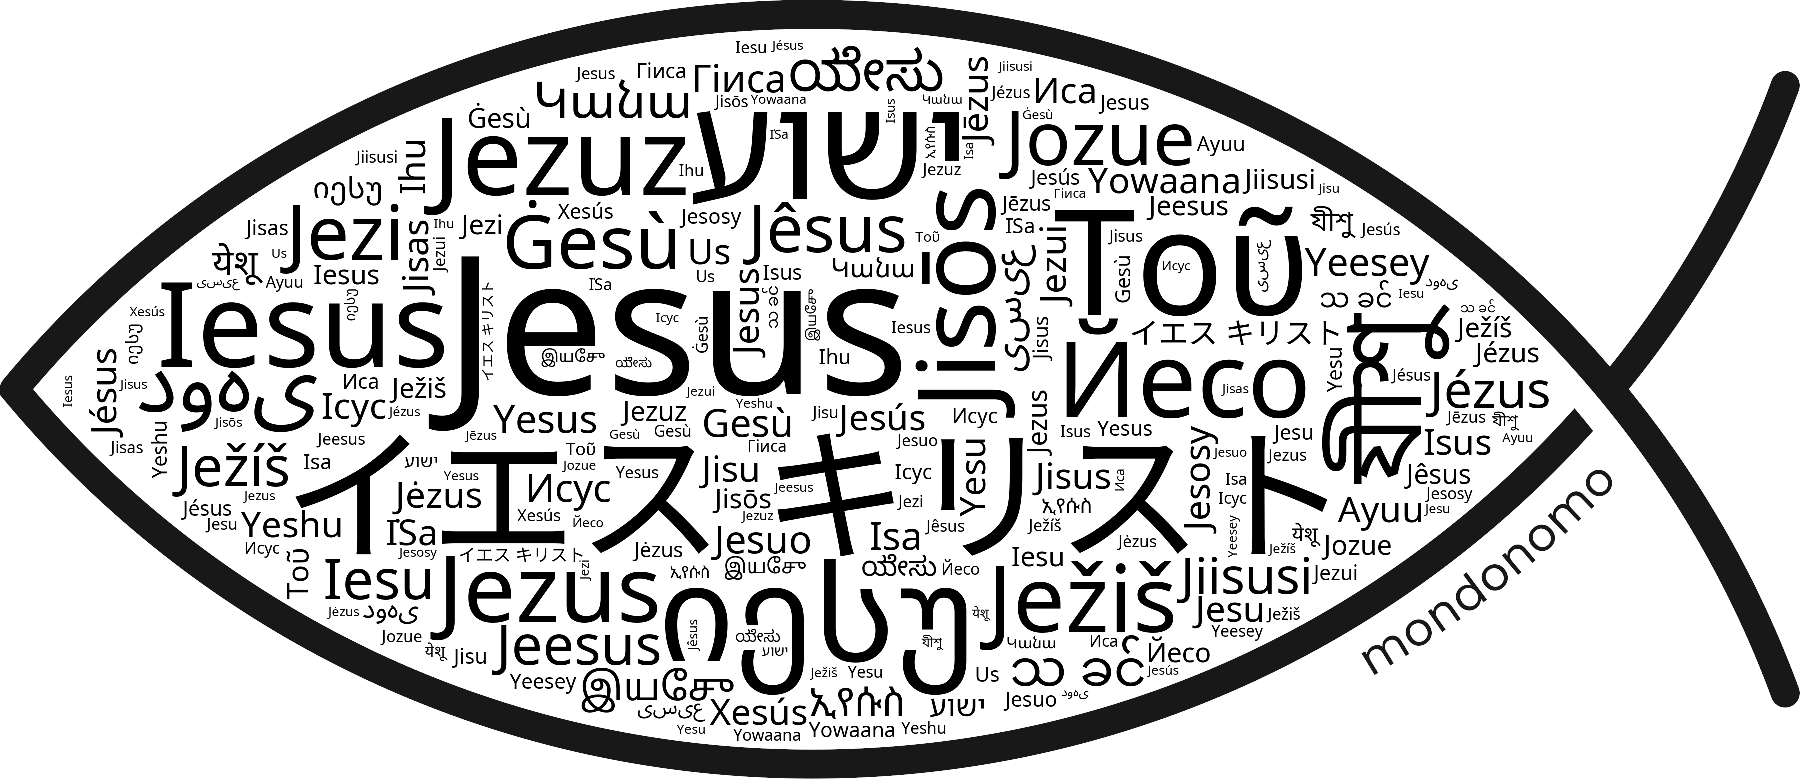 Name Jesus in the world's Bibles